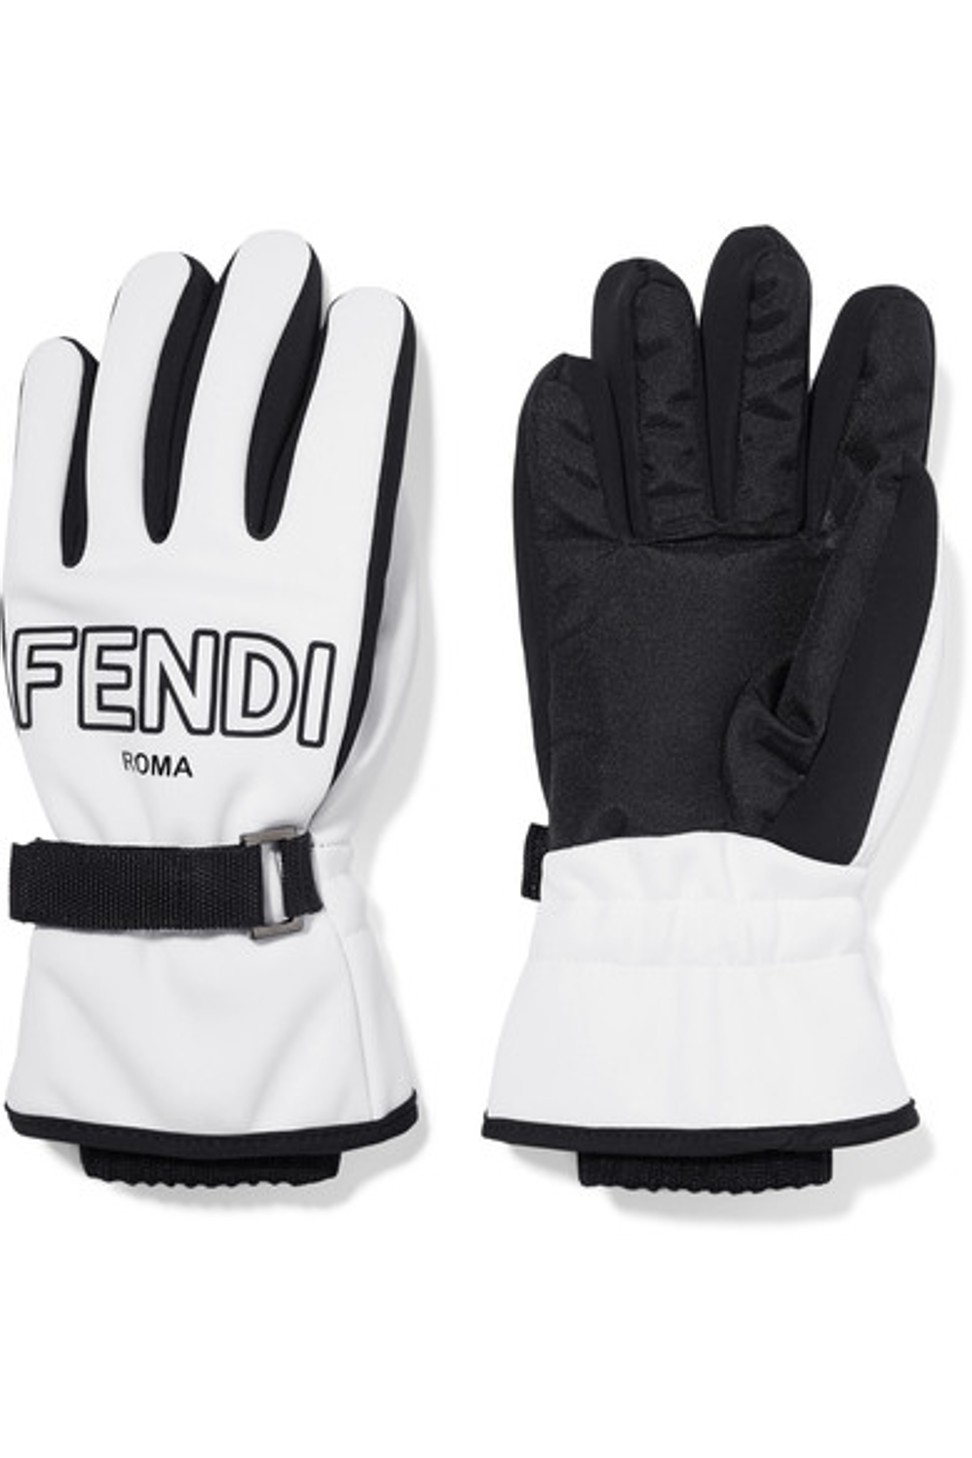 Fendi. These ski gloves,with ribbed-knit cuffs and fastening tabs, are lined with warm fleece, HK$4,500